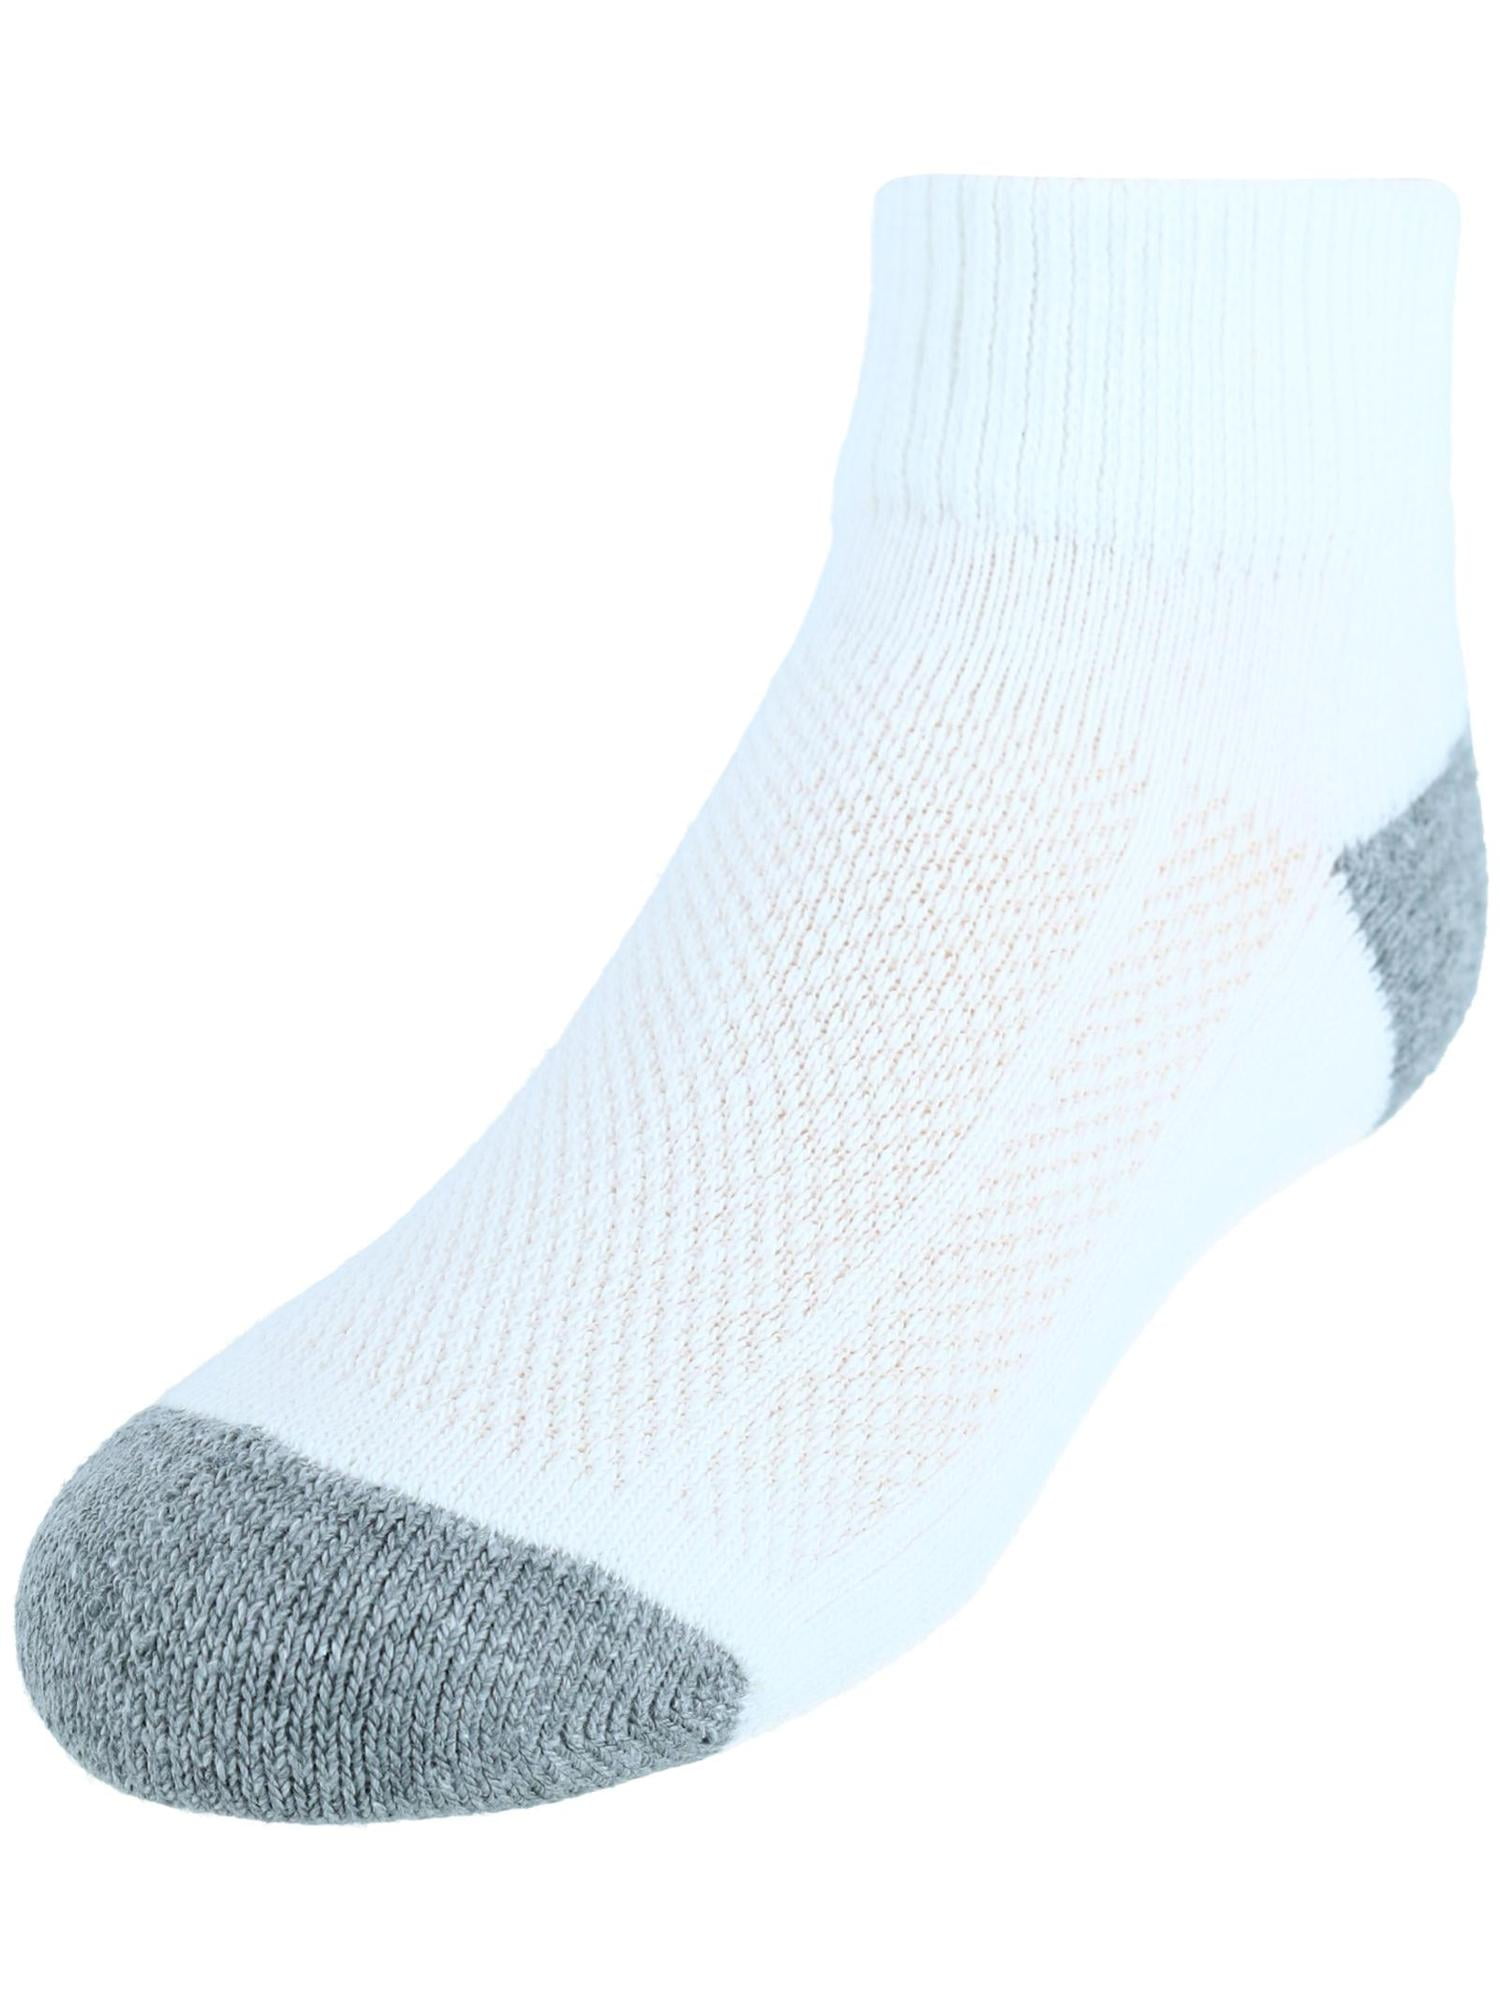 Reebok Boys Cushioned Comfort Quarter Basic Socks With Reinforced Heel And Toe 12 Pack 